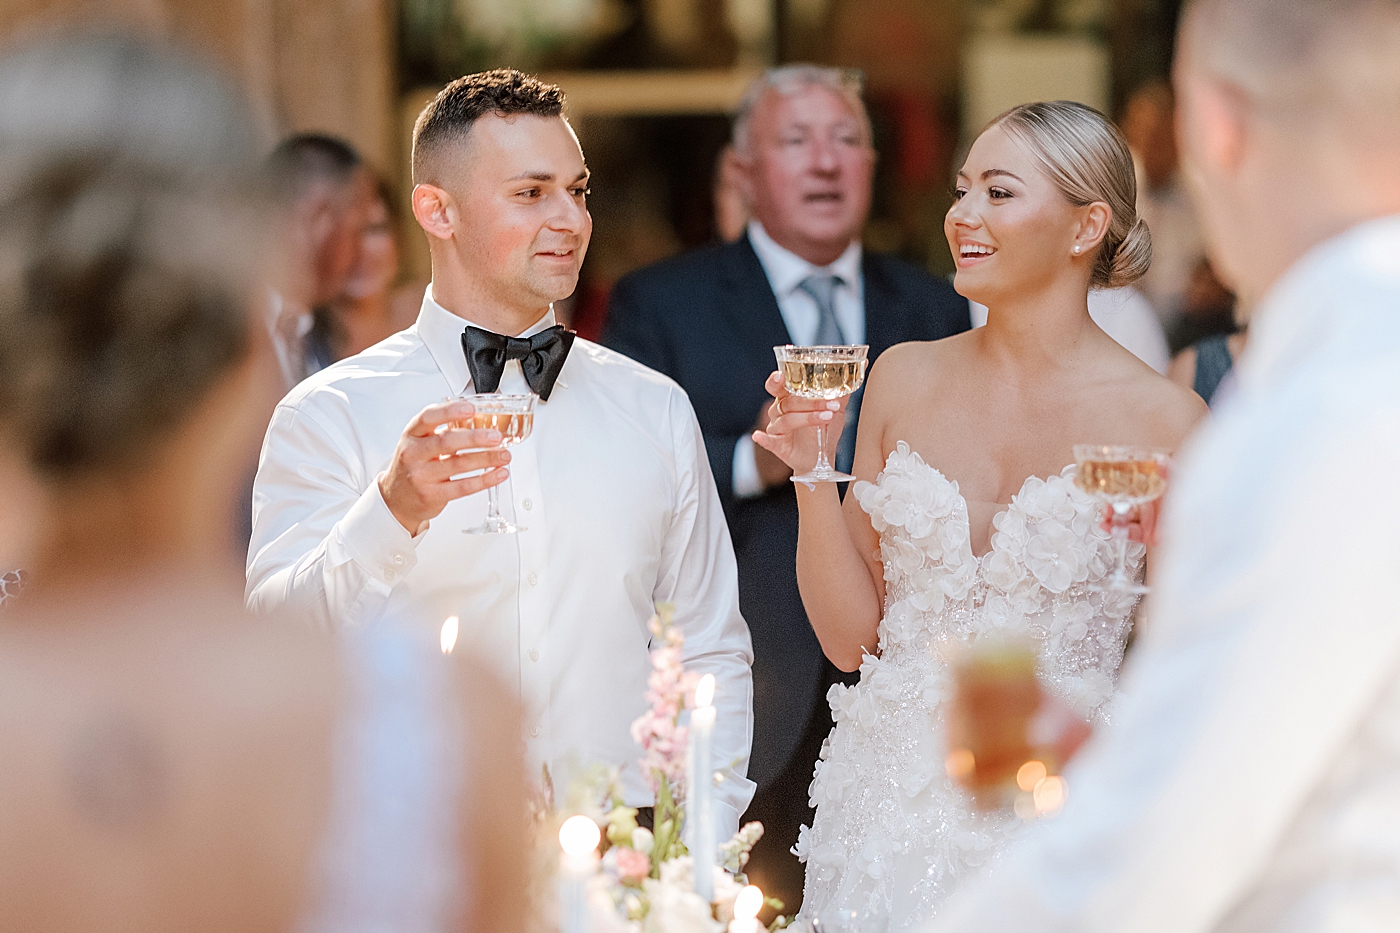 Bride and groom toast during reception | Image by Hope Helmuth Photography